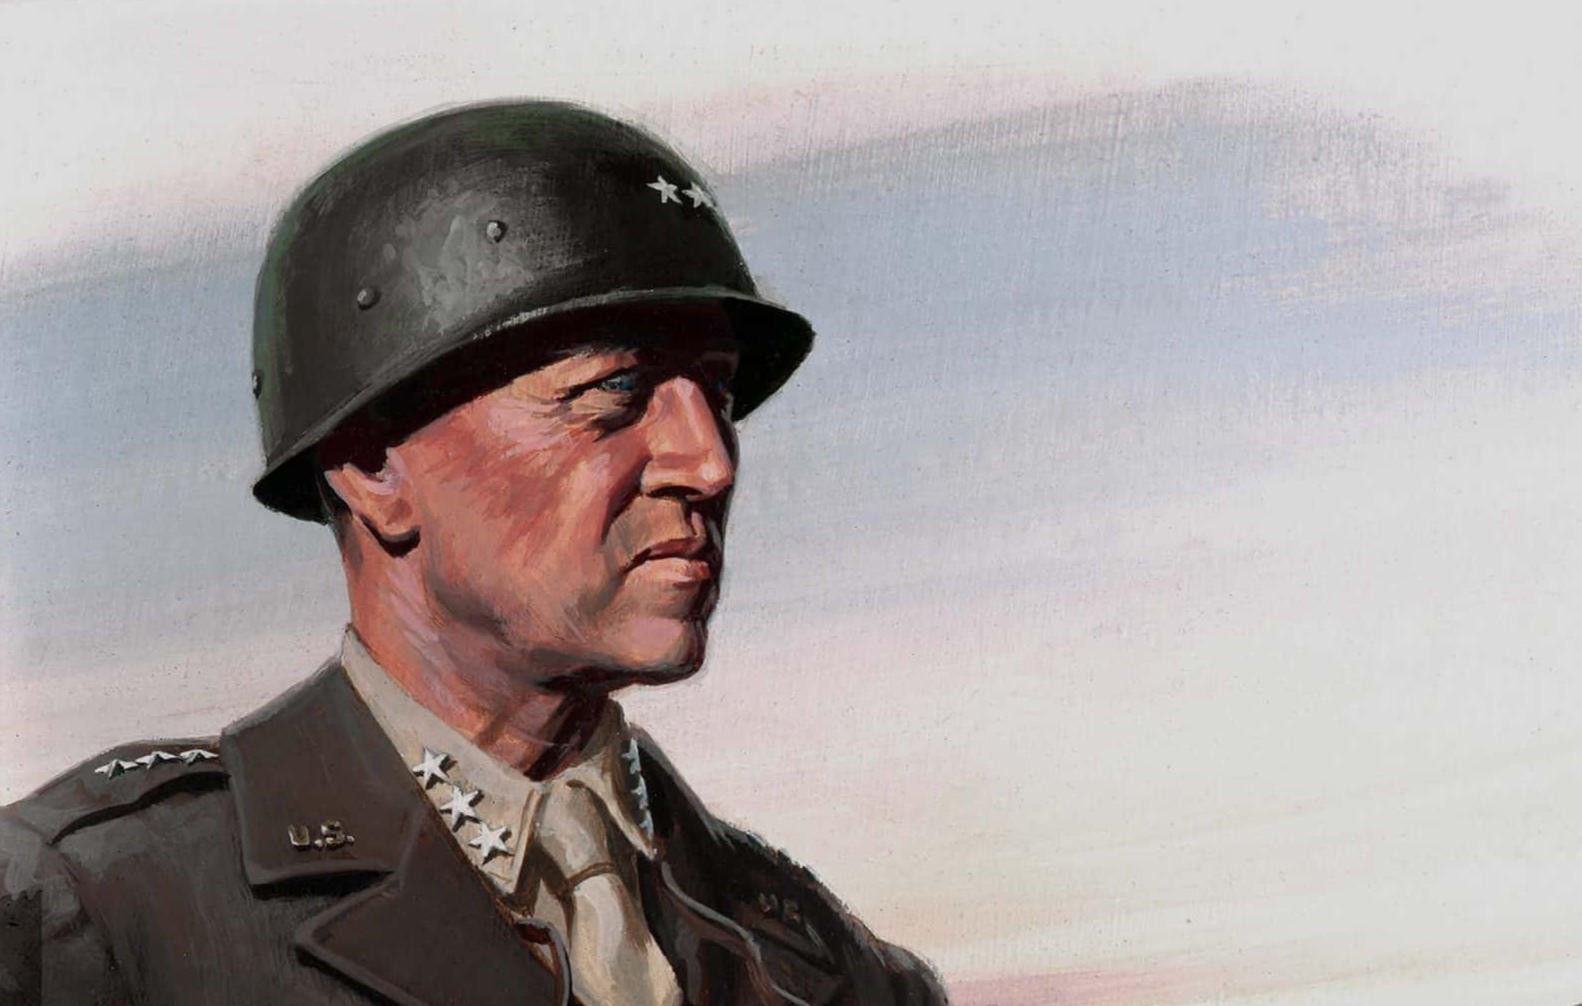 Shell Shock, Combat fatigue, PTSD & We all know the General Patton story:  100 Years of Developing Treatment